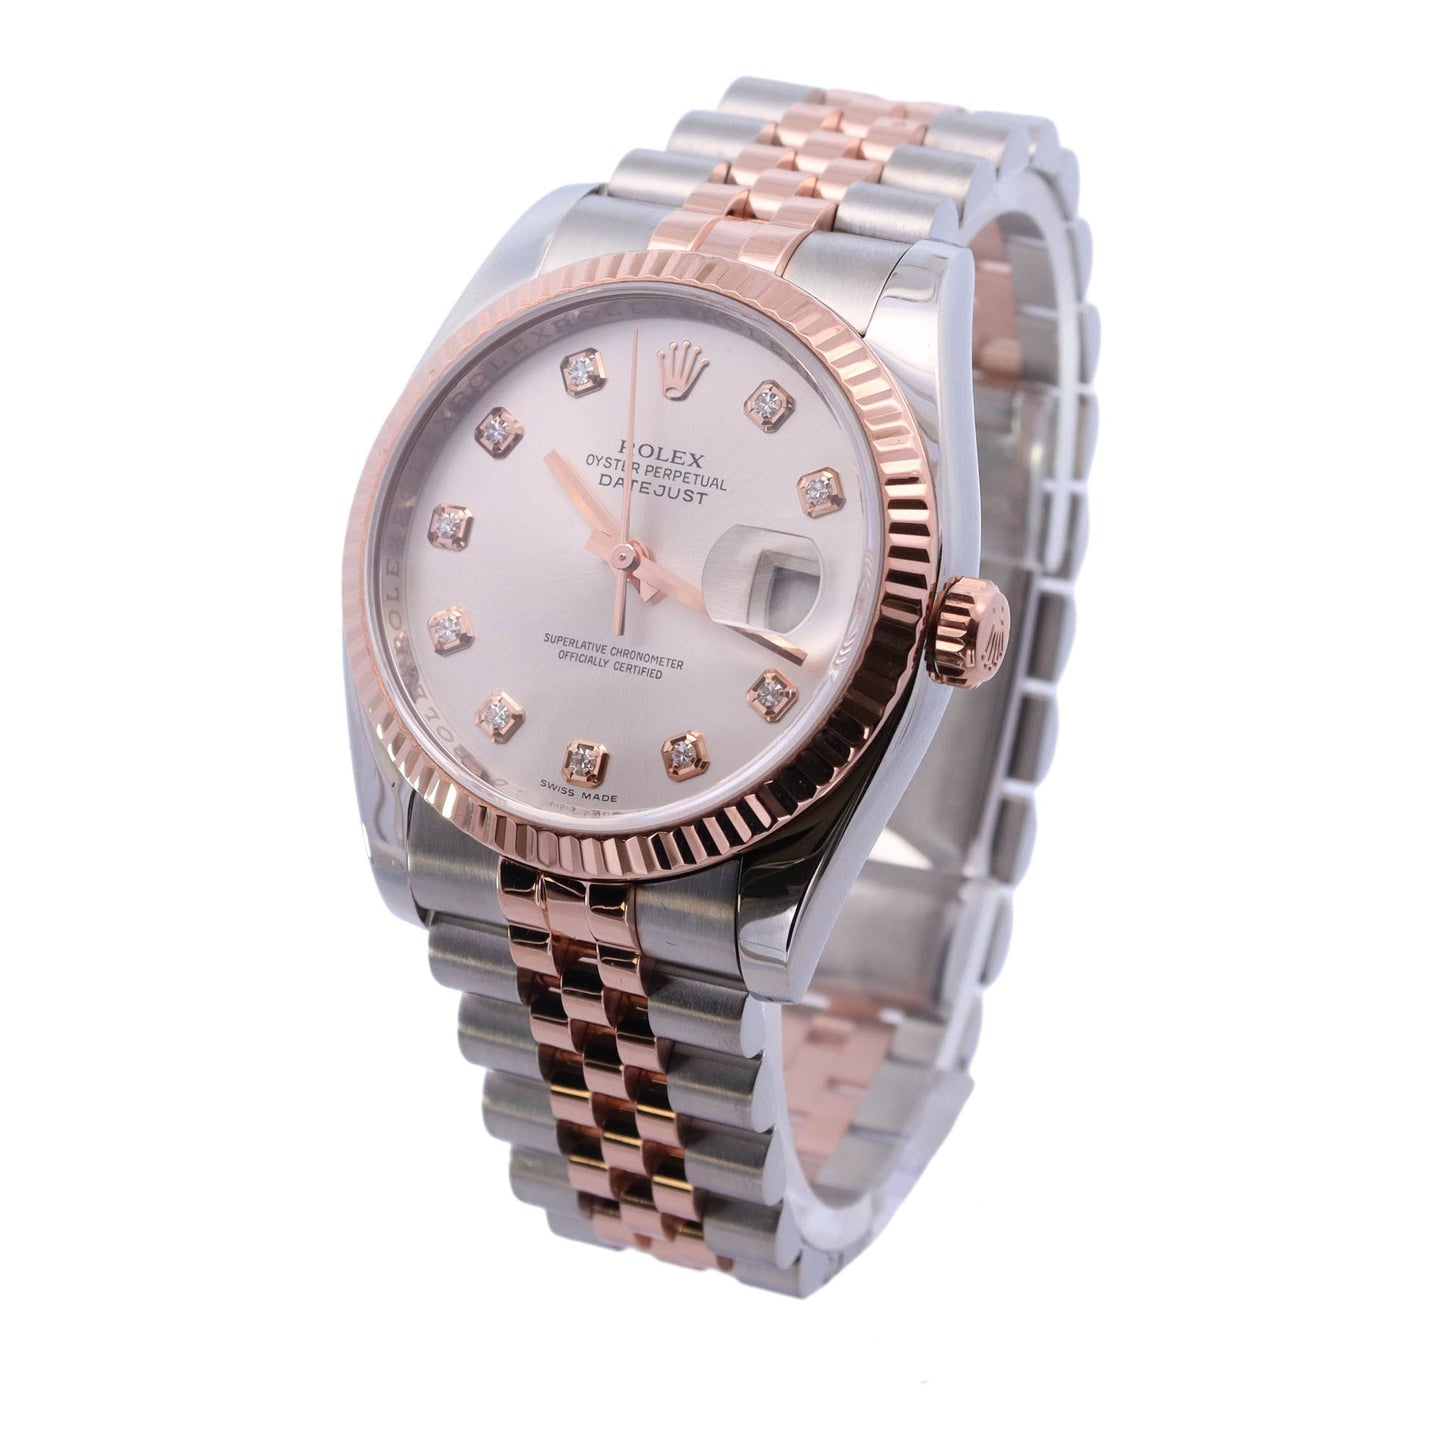 Rolex Datejust Two-Tone Stainless Steel Rose Gold 36mm Silver Diamond Dial Watch Reference #: 116231 - Happy Jewelers Fine Jewelry Lifetime Warranty